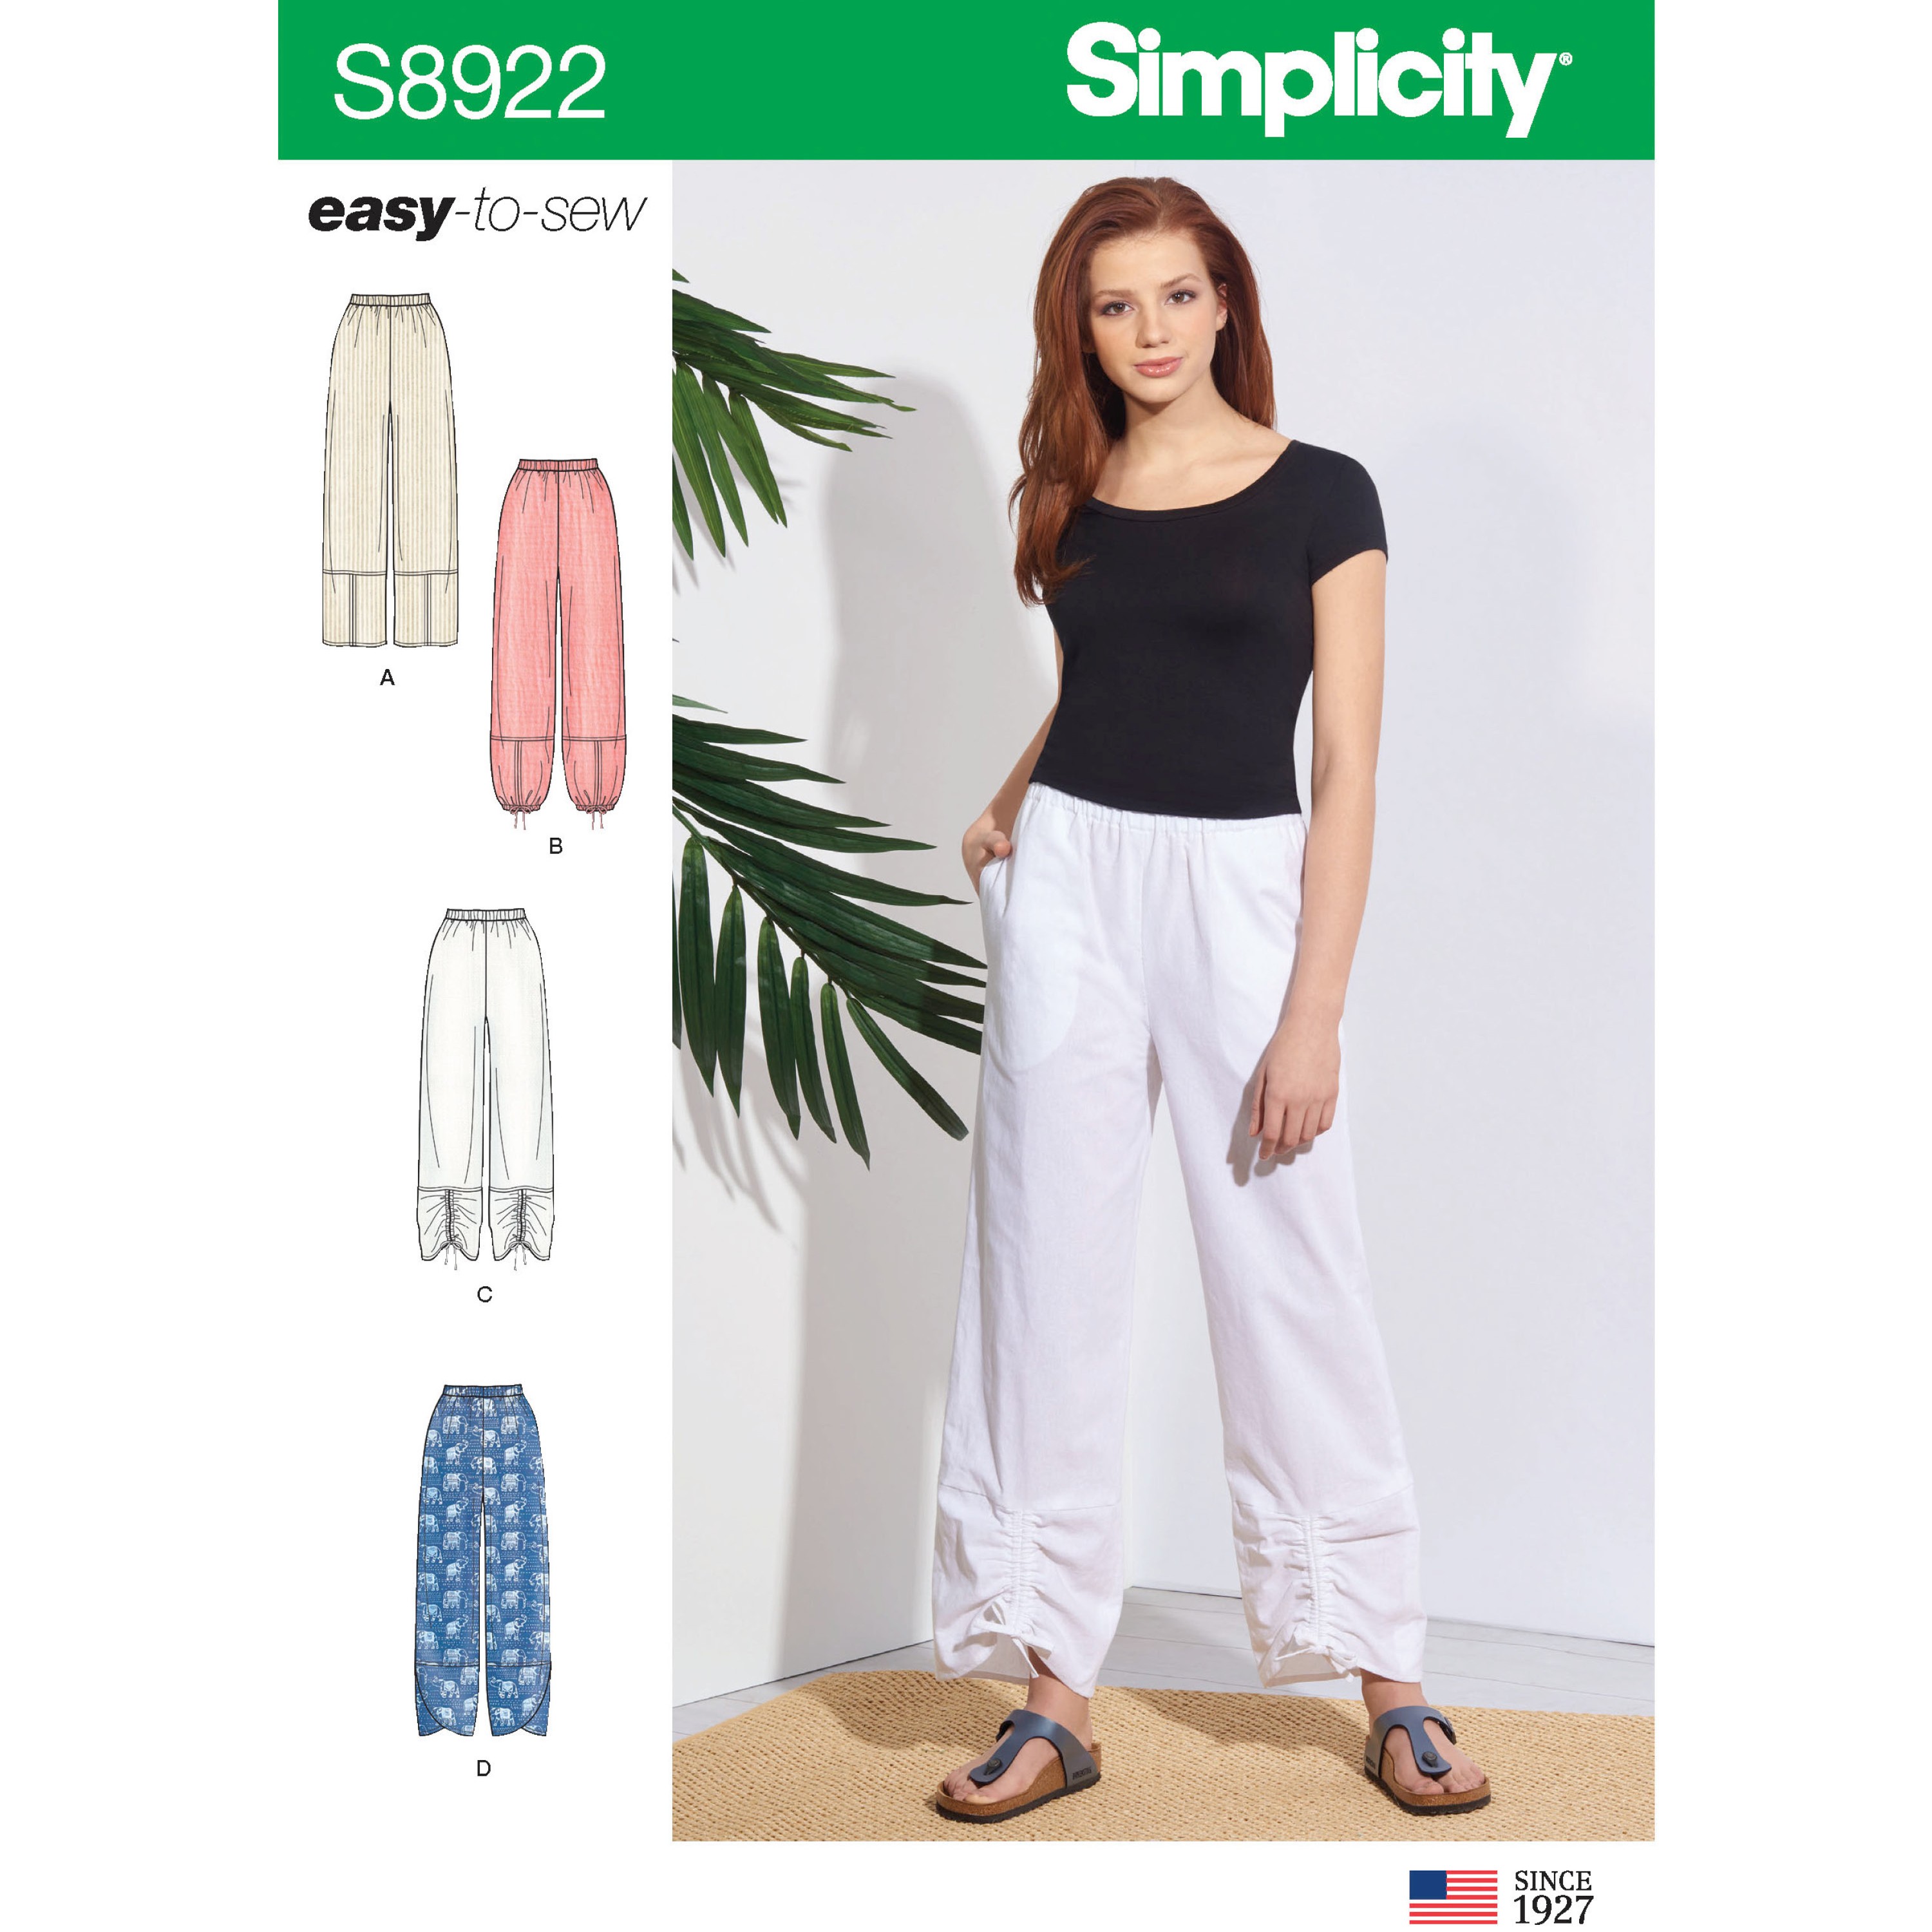 Simplicity Sewing Pattern 8922 Misses’ Comfy Casual Light weight Trousers